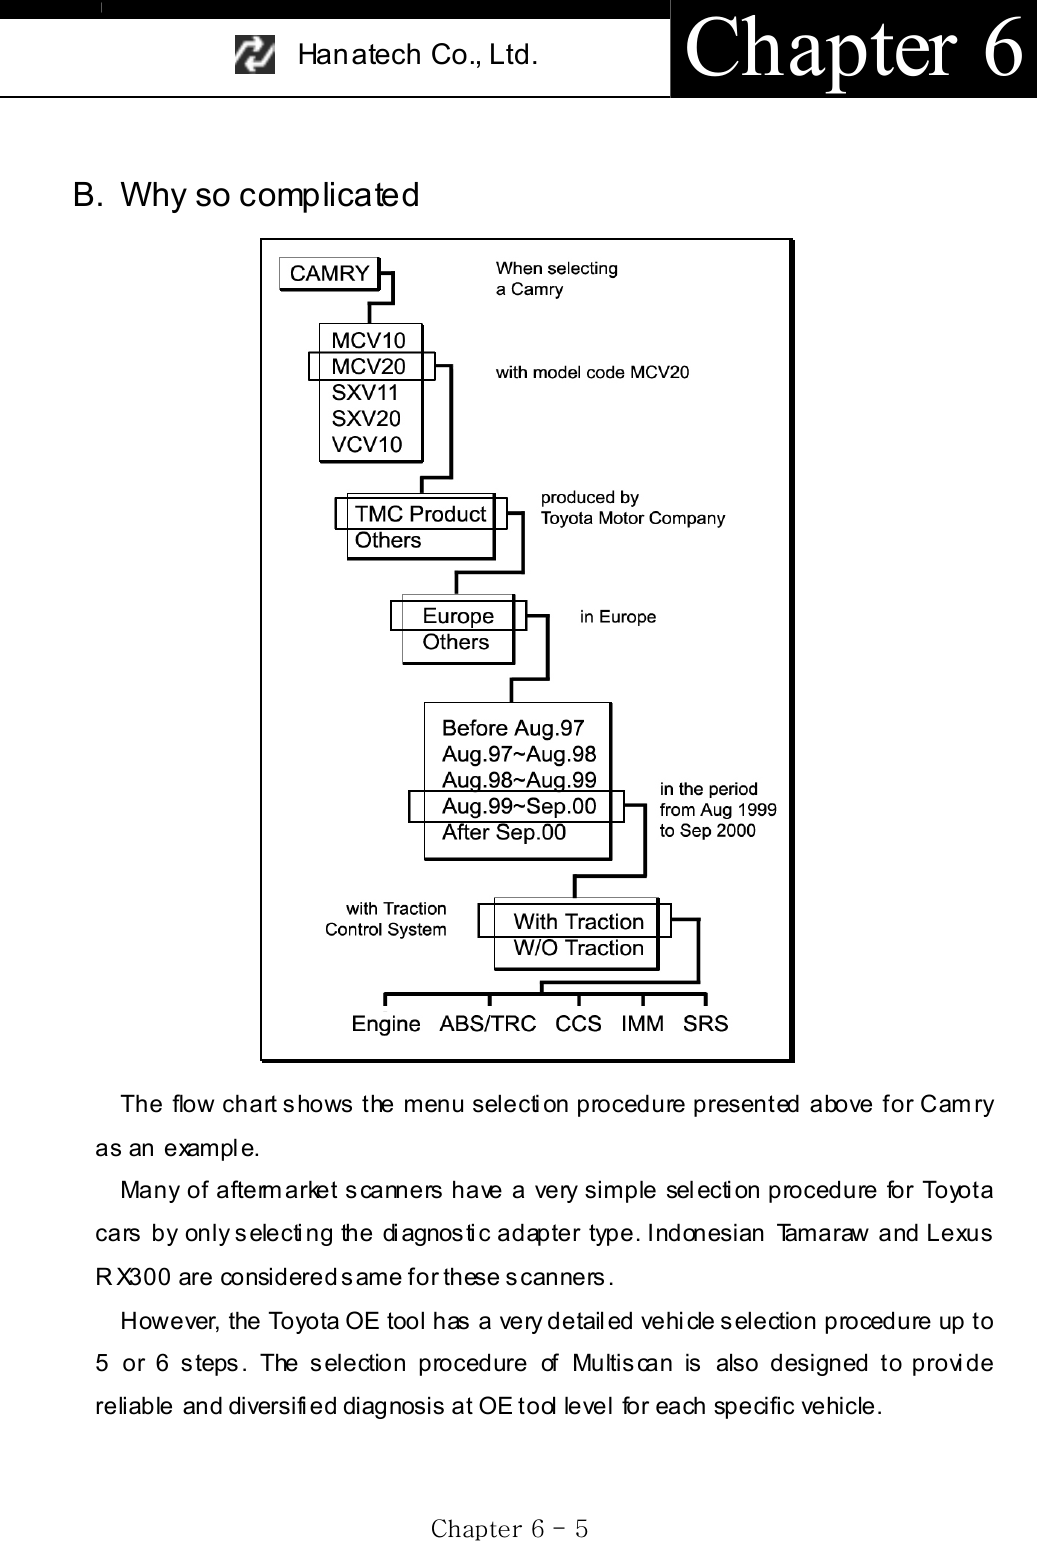 Han atech Co., Ltd.  Chapter 6 GjG]GTG \GB. Why so complicated The flow chart shows the menu selection procedure presented above for Camry as an exampl e.     Many of aftermarket scanners have a very simple selection procedure for Toyota cars by only s electi ng the di agnos ti c adapter type. Indonesian Tamaraw and Lexus RX300  are considered same for these scanners. However, the Toyota OE tool has a very detailed vehicle selection procedure up to 5 or 6 steps.  The selection procedure of Multiscan is also designed to provide reliable and diversifi ed diagnosis at OE tool  level for each specific vehicle. 